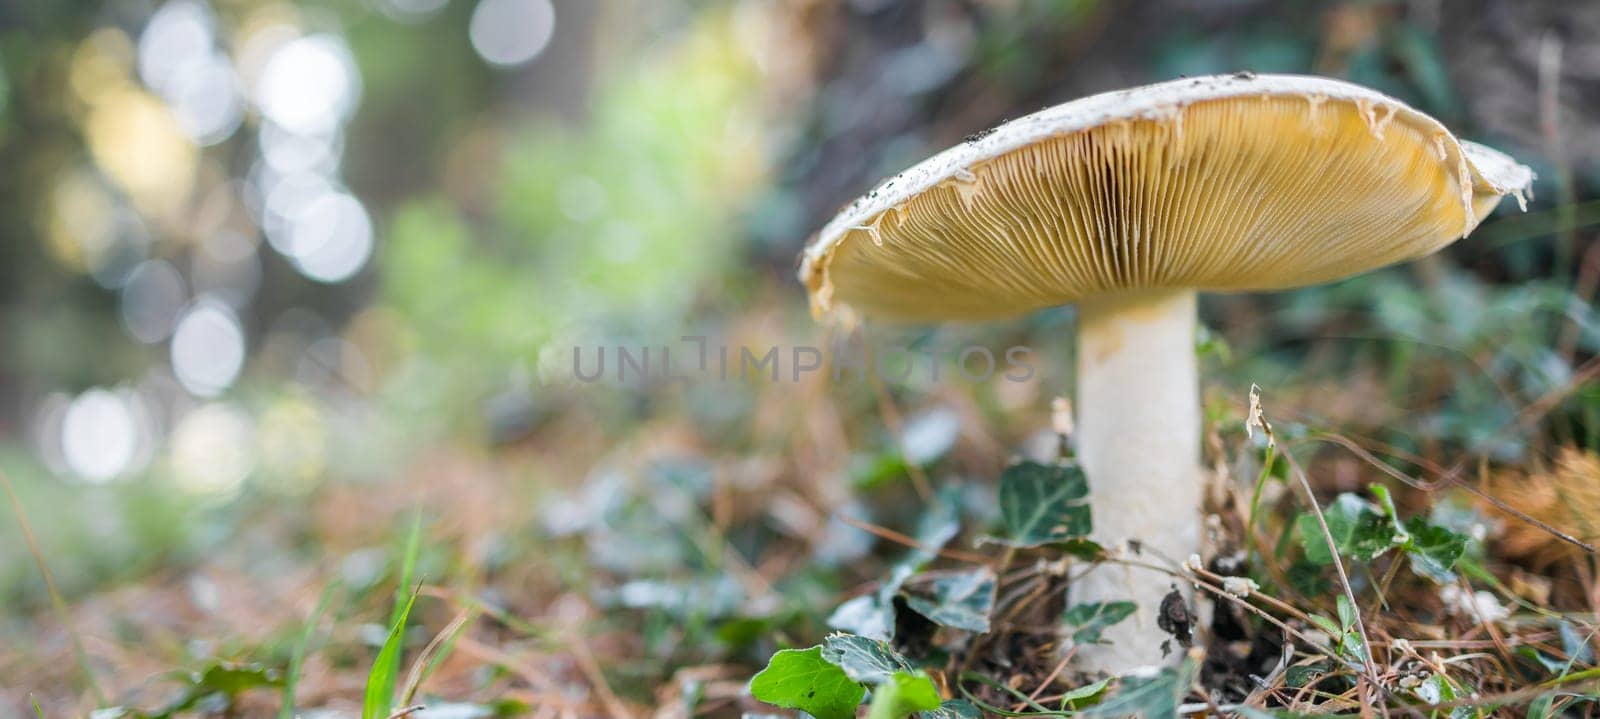 Ripe mushroom in summer forest scene banner with copy space. Mushroom macrophoto. Natural mushroom growing and pick up. Ecotourism activity. Copy space and empty space for text by Satura86